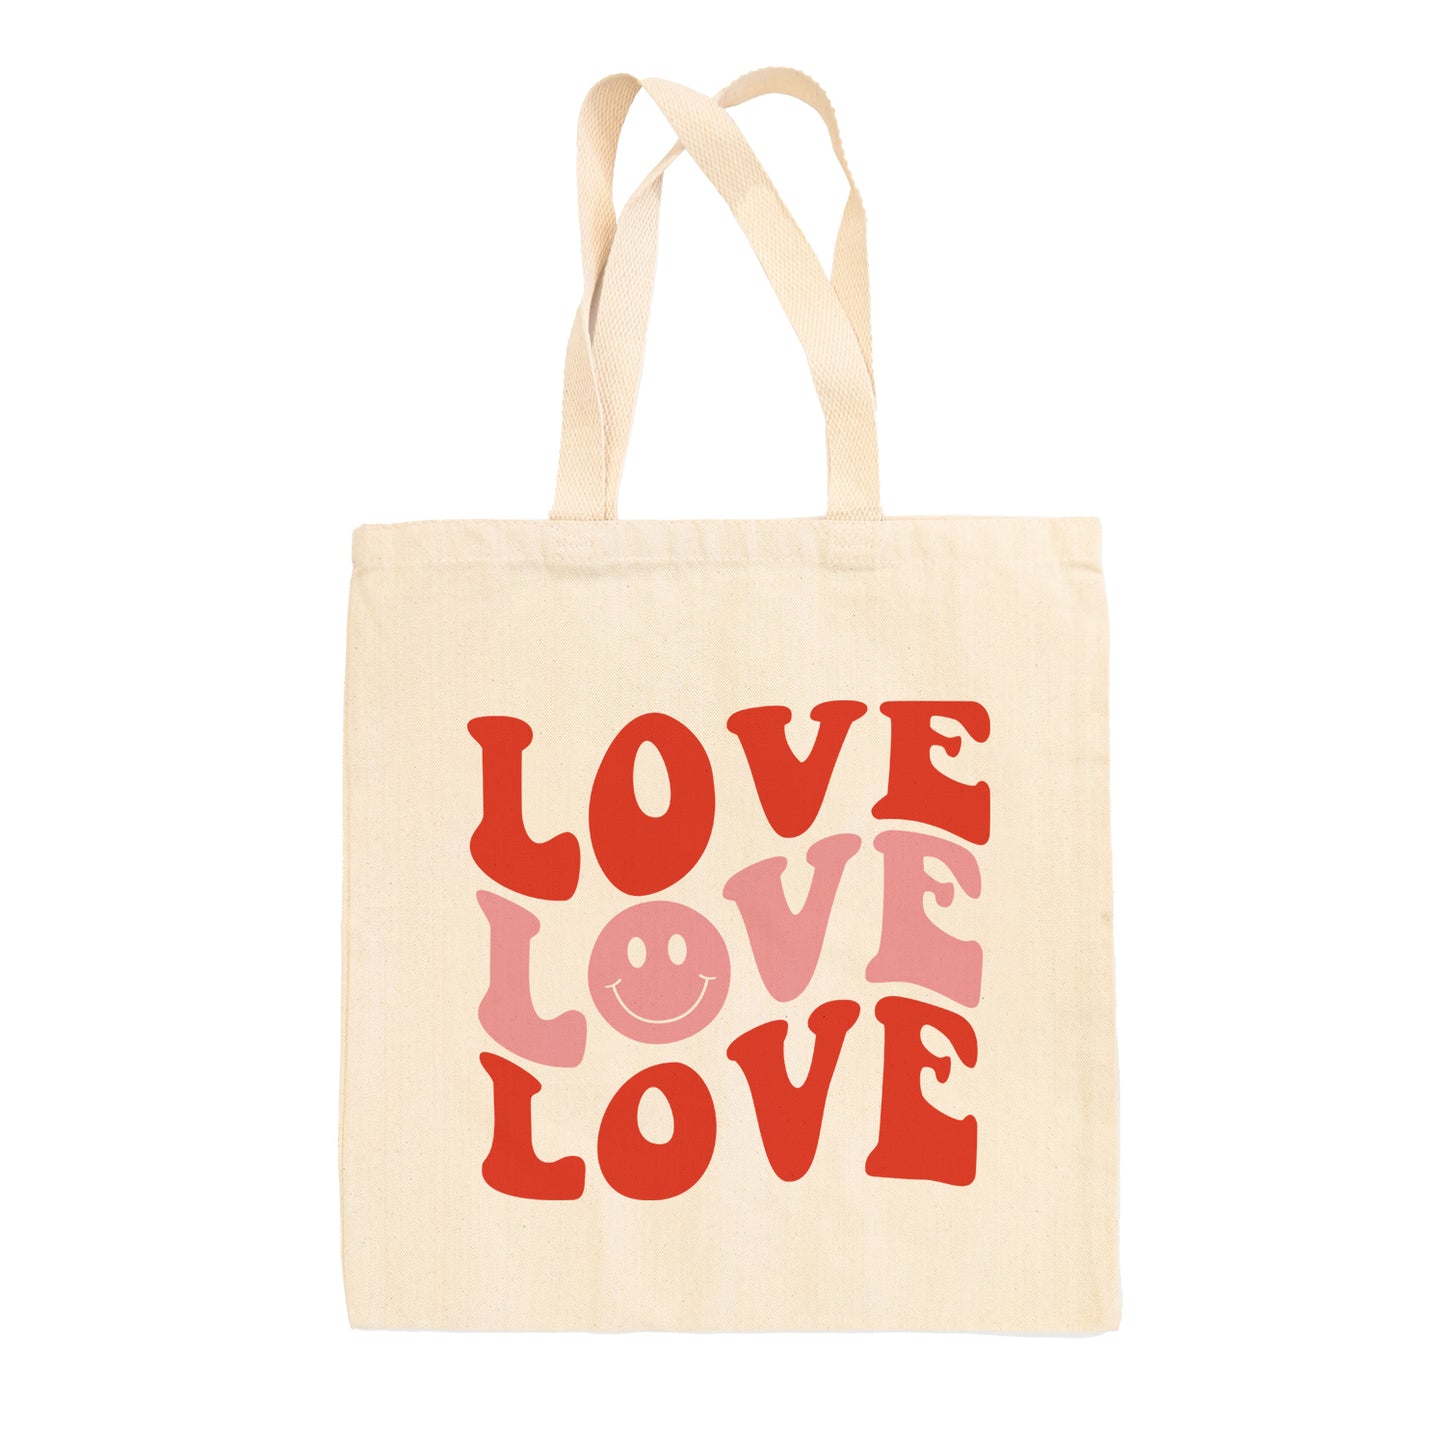 Love (Repeated Smiley Face) Tote Bag